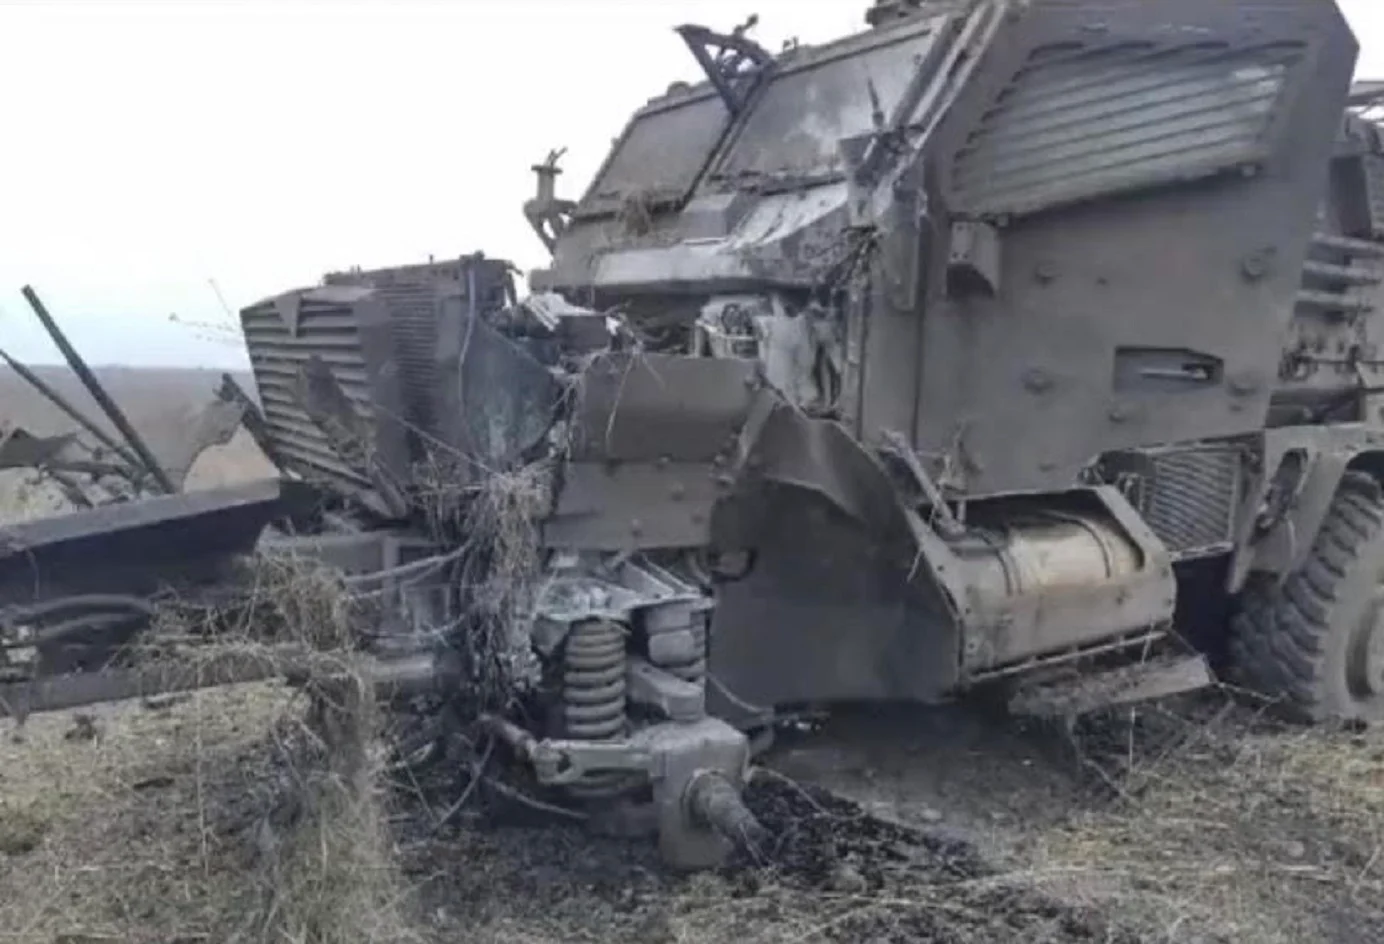 Ukrainian Soldiers were wounded but survived after their MRAP armored vehicle ran over a landmine